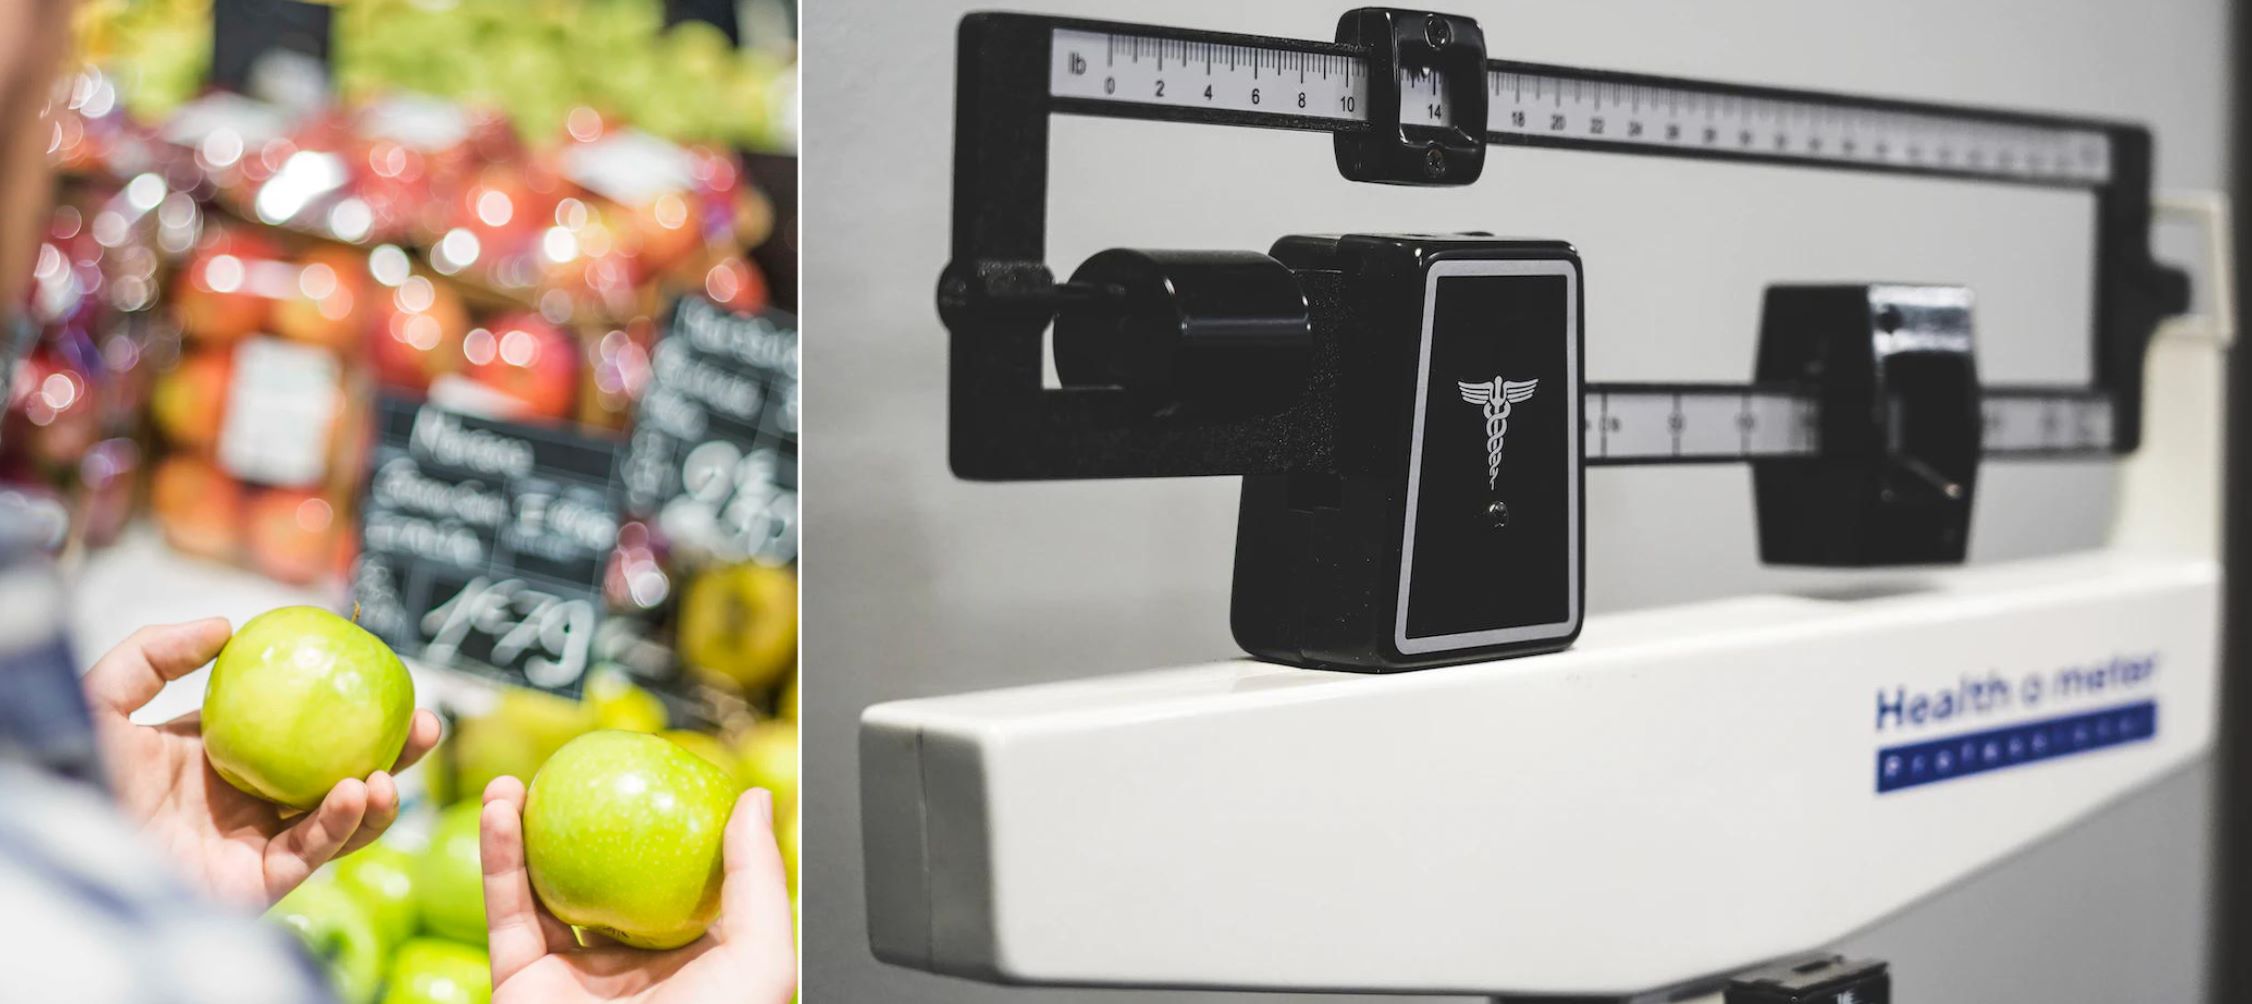 5 Simple Habits That Can Help You Lose Weight